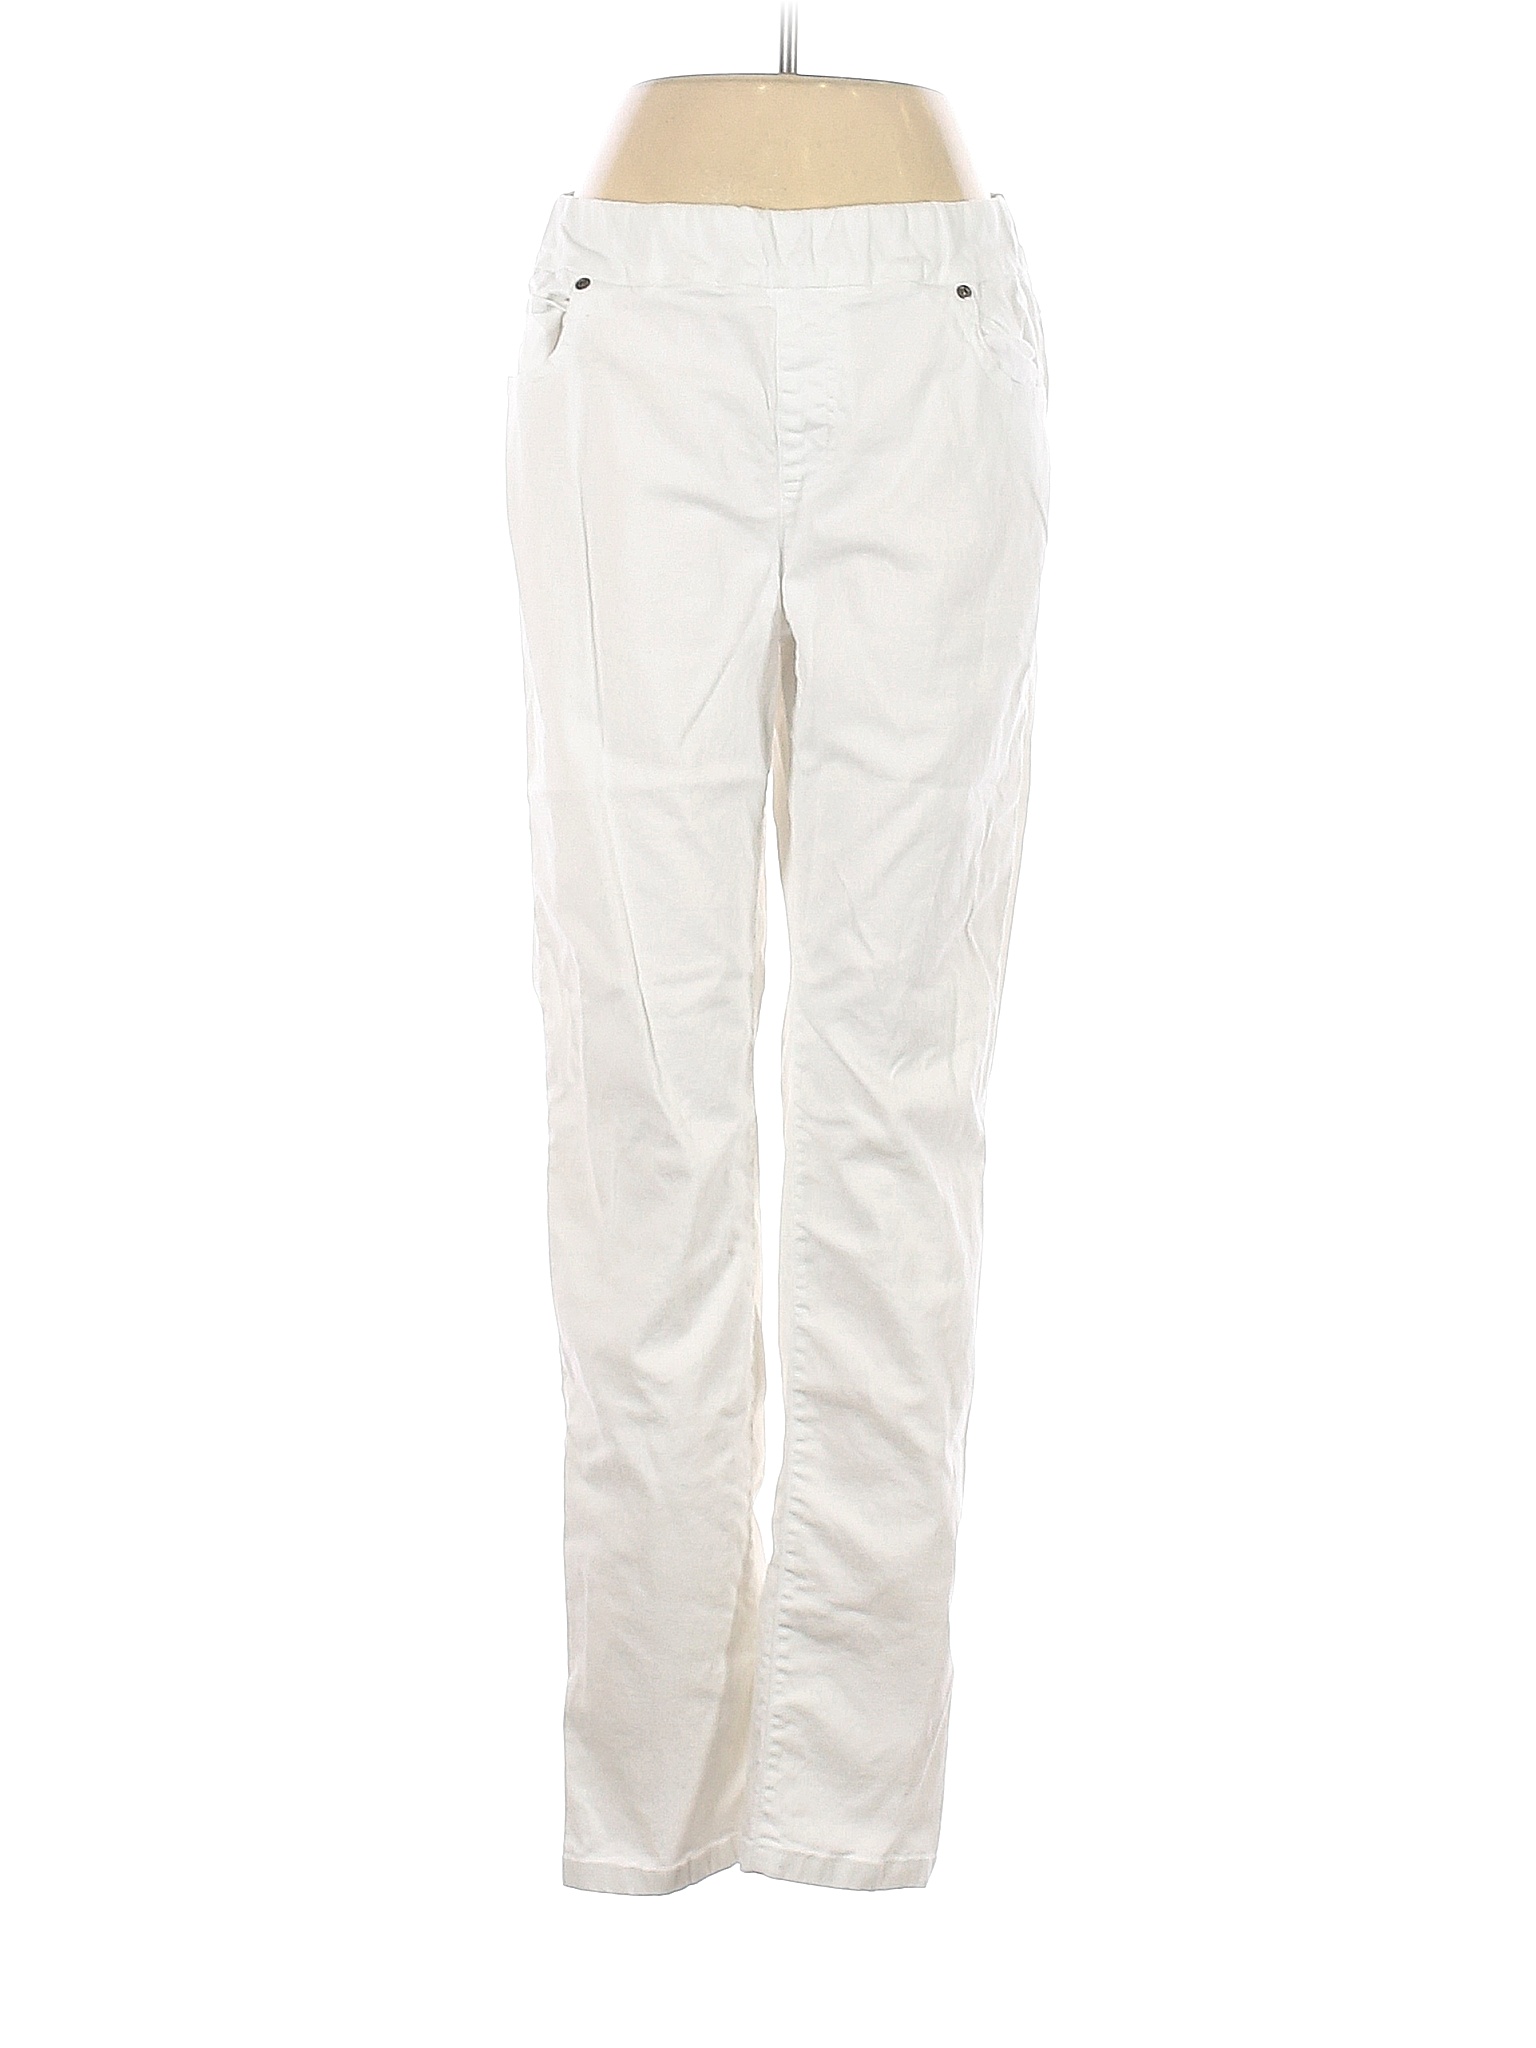 Appleseeds Solid White Jeans Size 8 - 73% off | thredUP